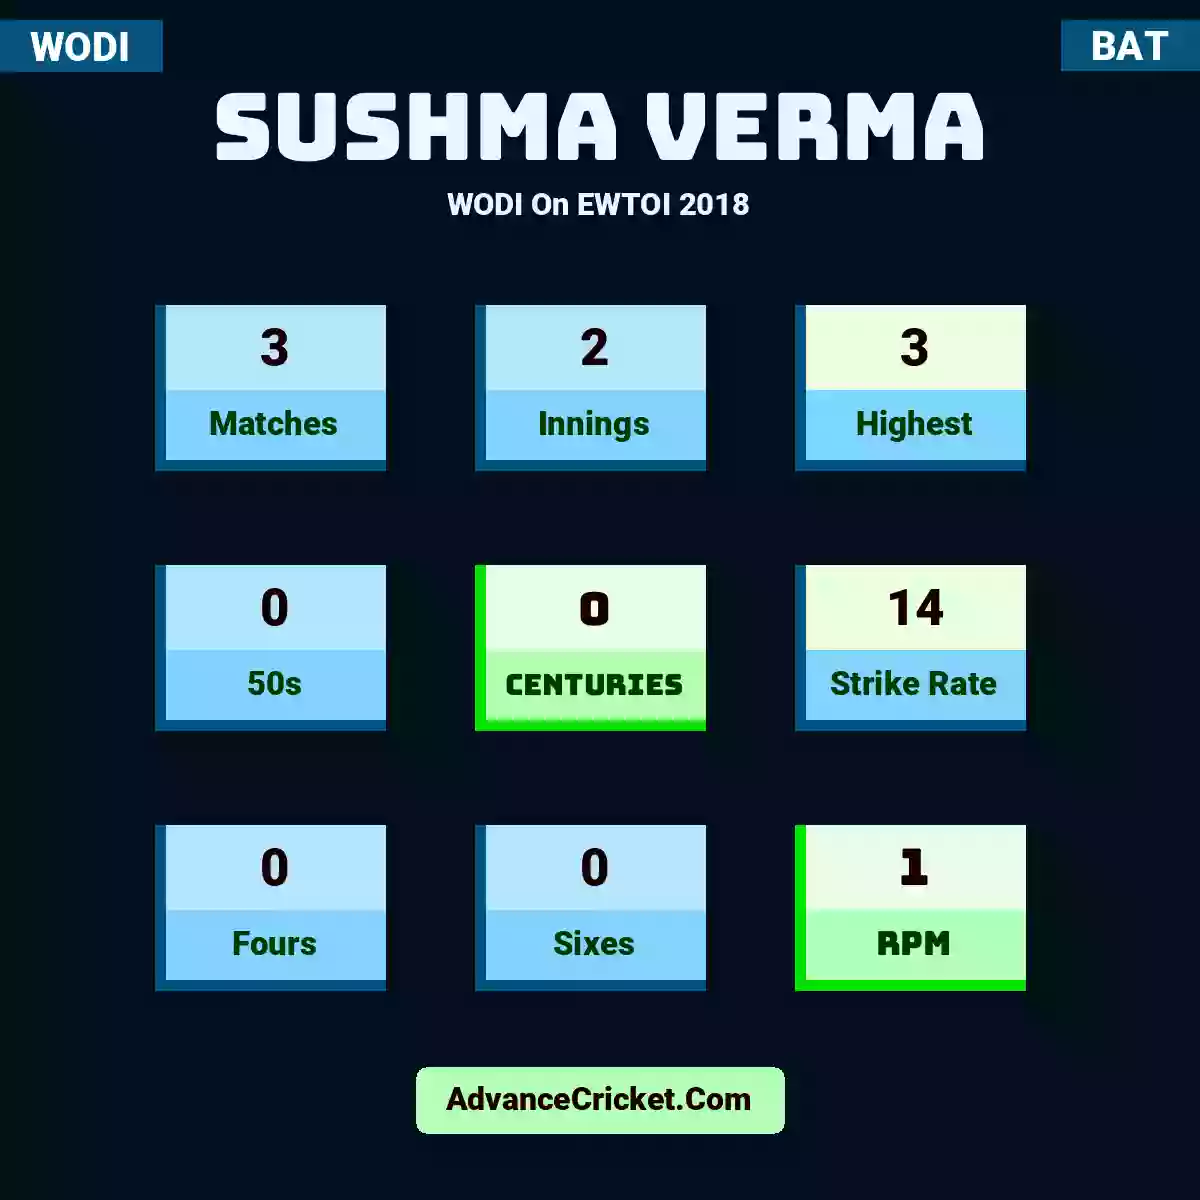 Sushma Verma WODI  On EWTOI 2018, Sushma Verma played 3 matches, scored 3 runs as highest, 0 half-centuries, and 0 centuries, with a strike rate of 14. S.Verma hit 0 fours and 0 sixes, with an RPM of 1.